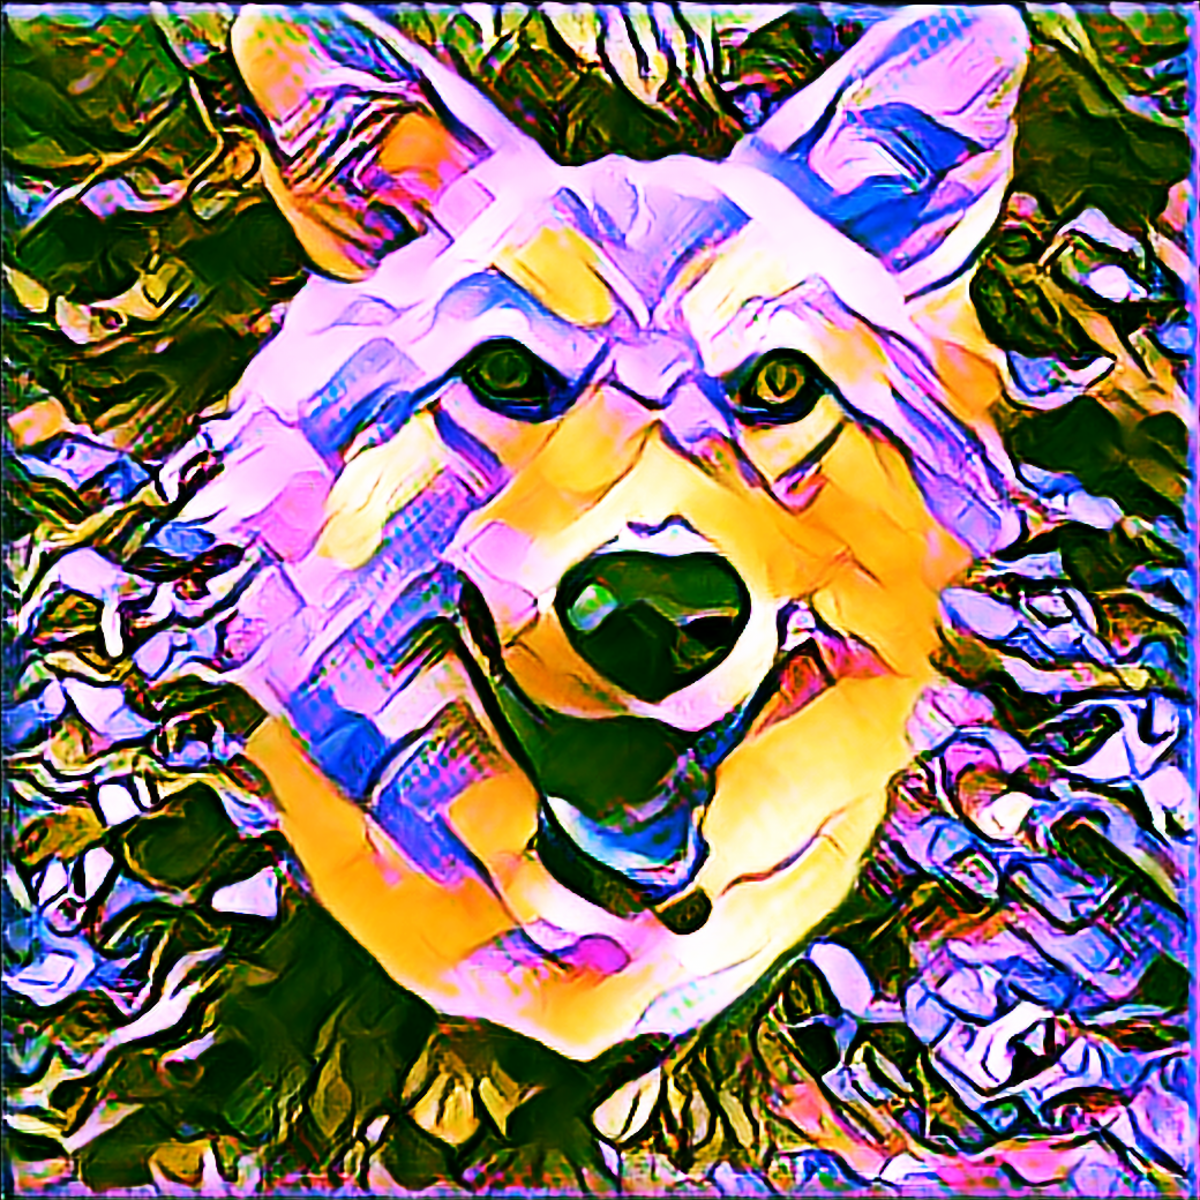 Abstract realism using AI style transfer.